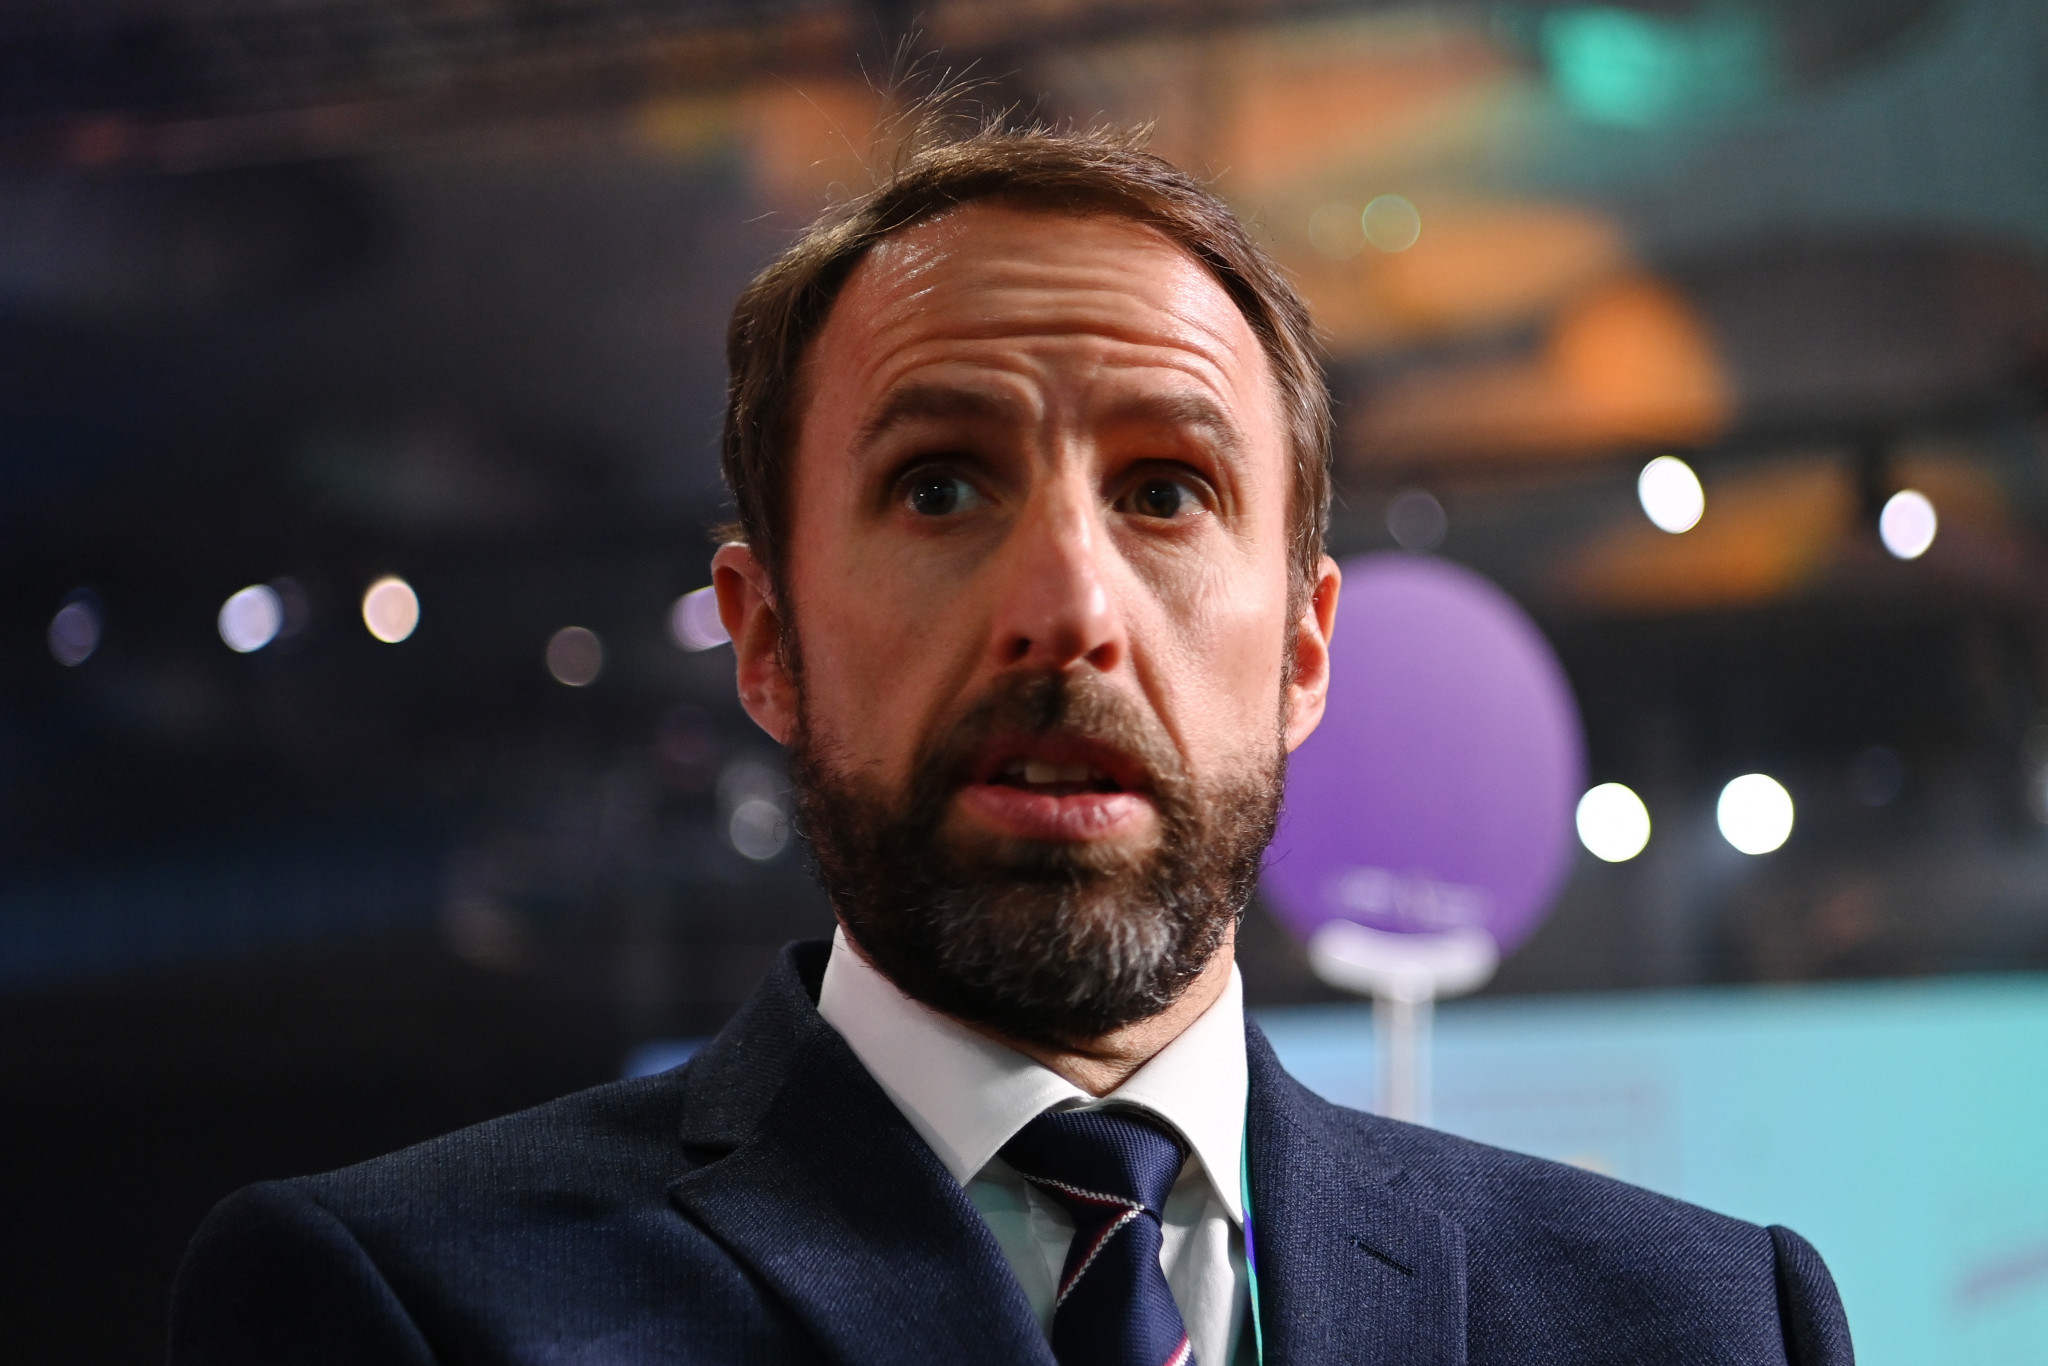 England manager Gareth Southgate had said it would be a "great shame" if fans do not feel comfortable attending Qatar 2022 ©Getty Images